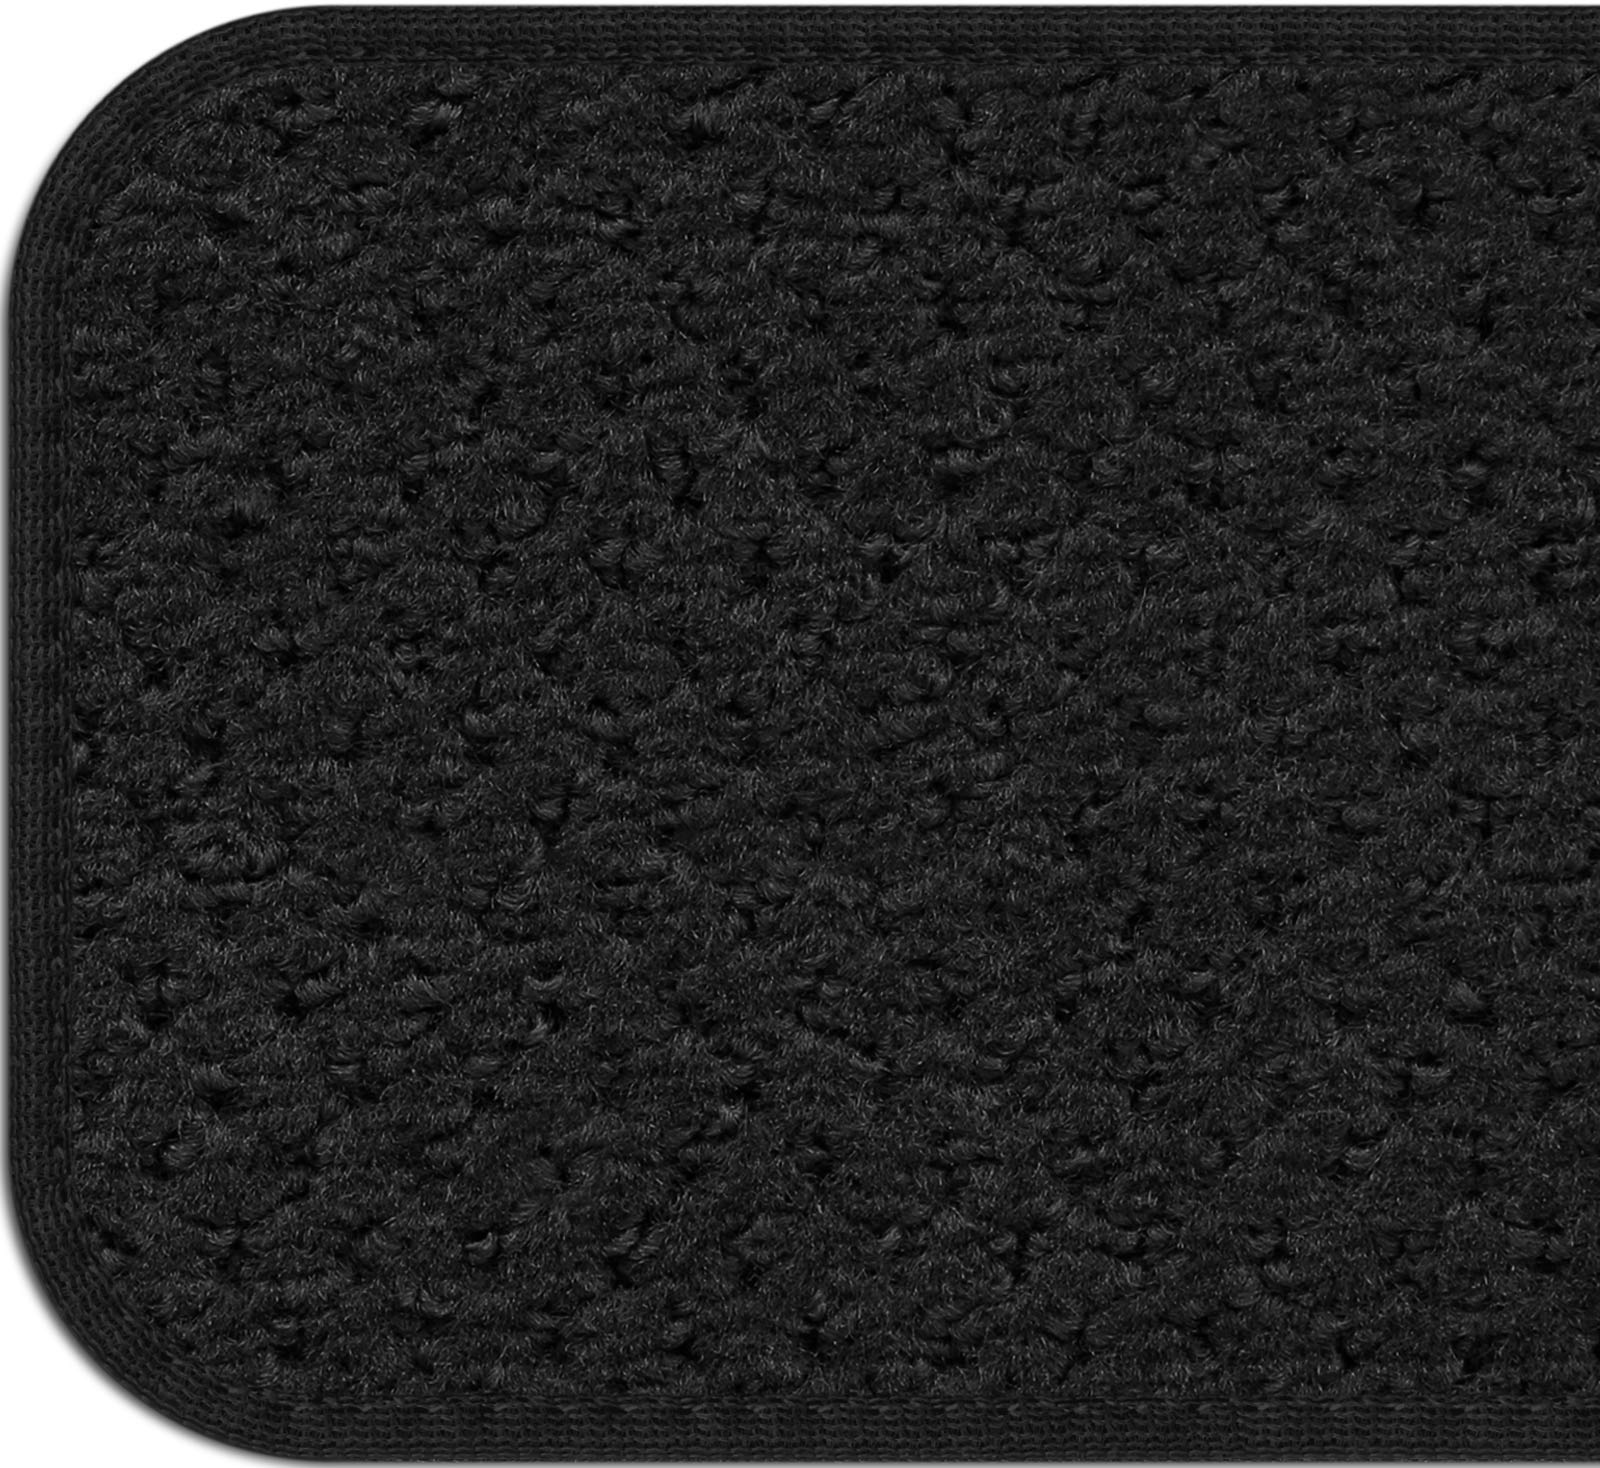 House, Home and More Set of 12 Skid-resistant Carpet Stair Treads - Black - 8 In. X 30 In.